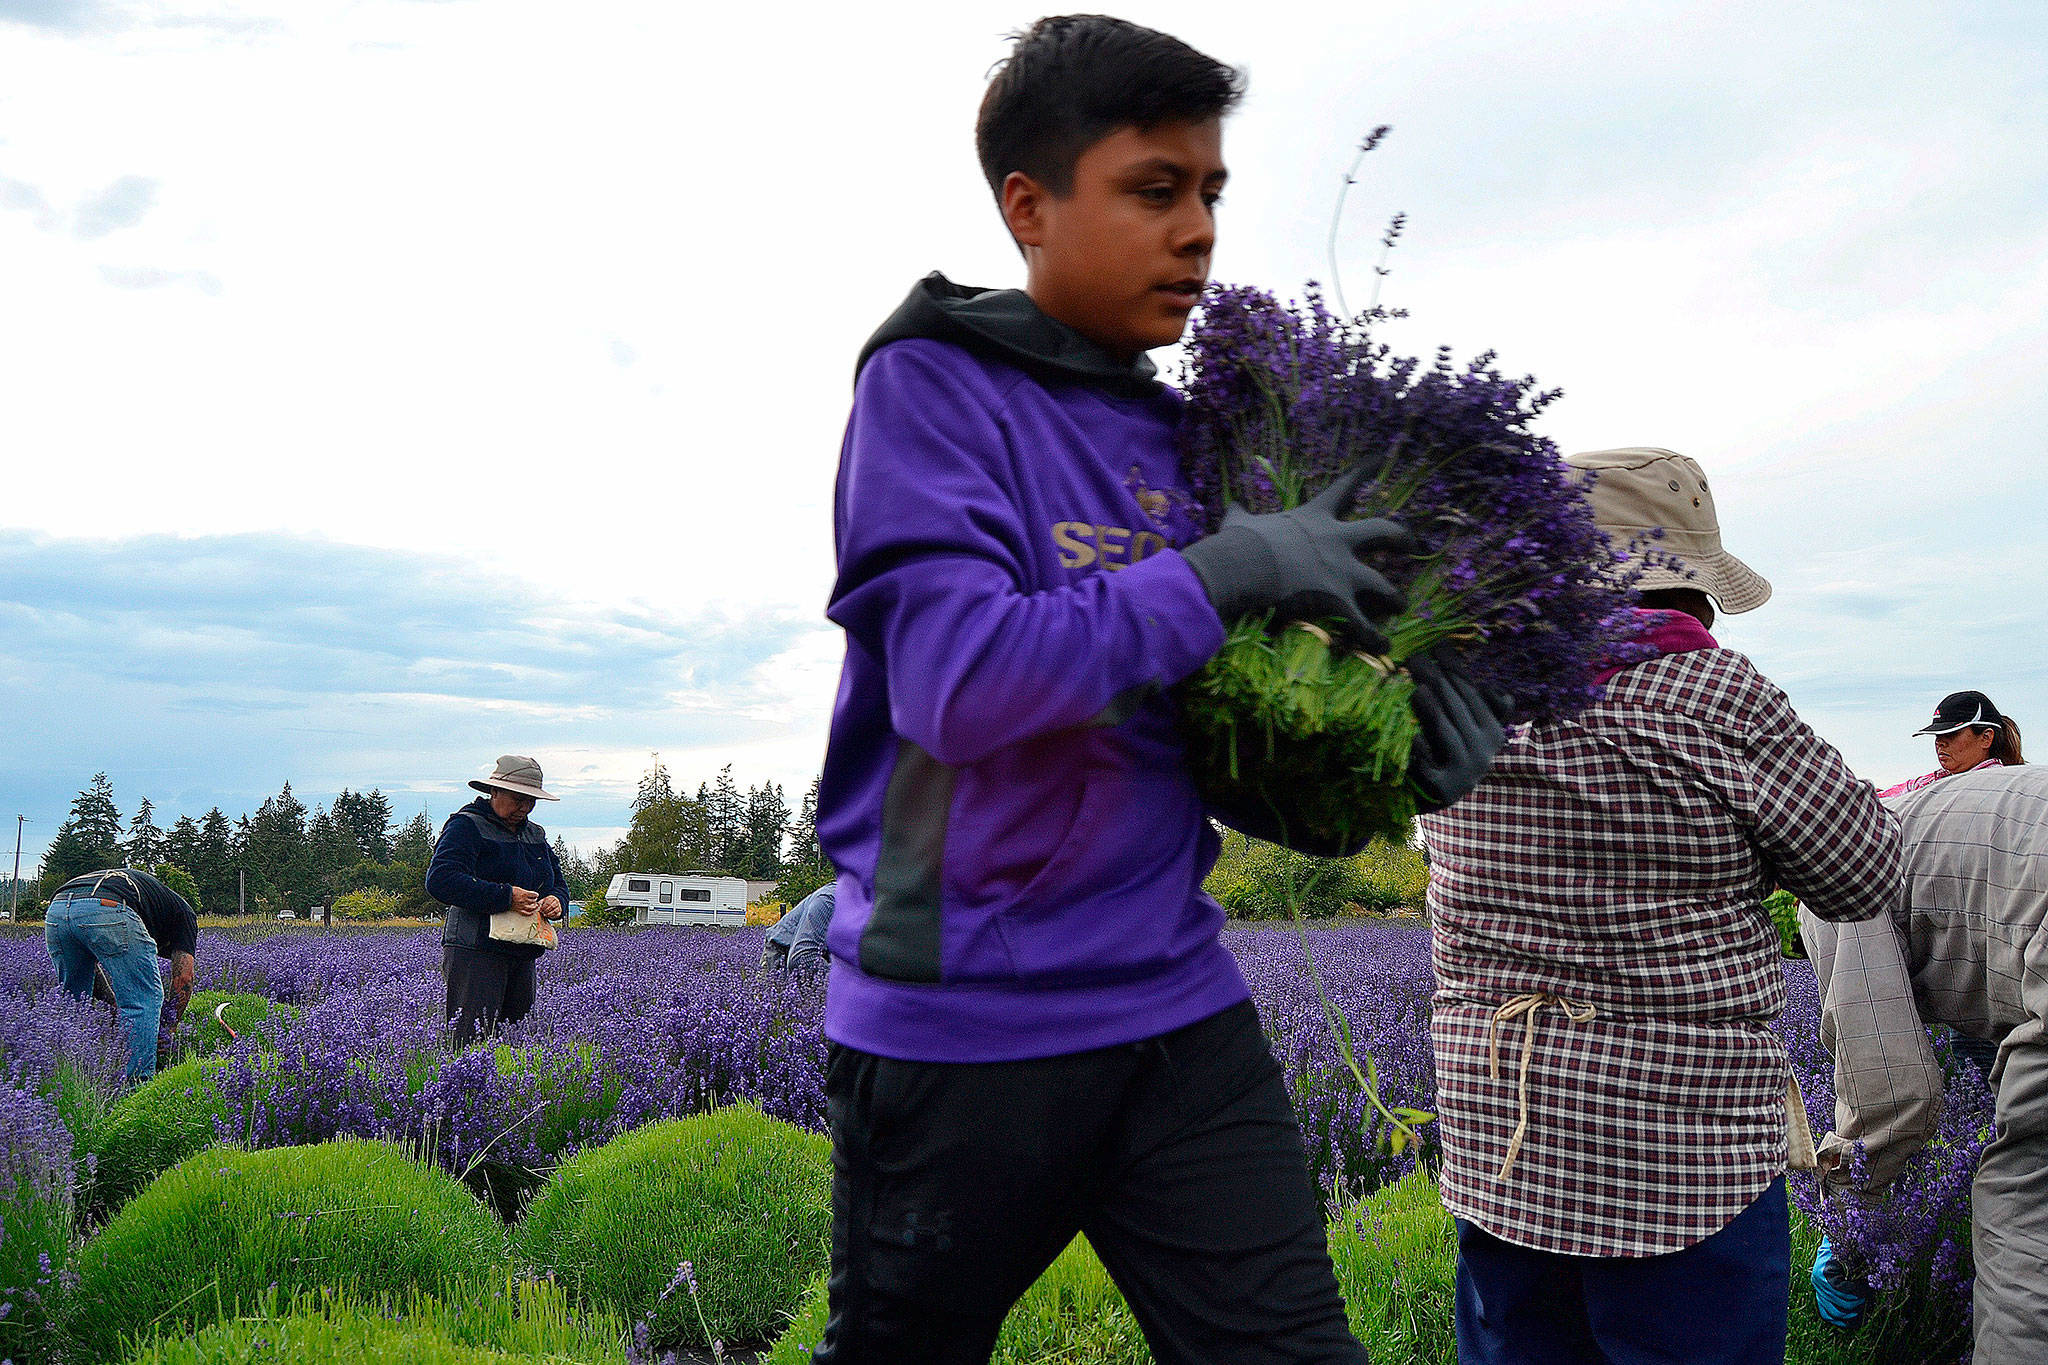 Abraham Torres carries an armful of bundles on June 26 at the B&B Family Farm where he and his family members harvest lavender and hang it in the farm’s barn.